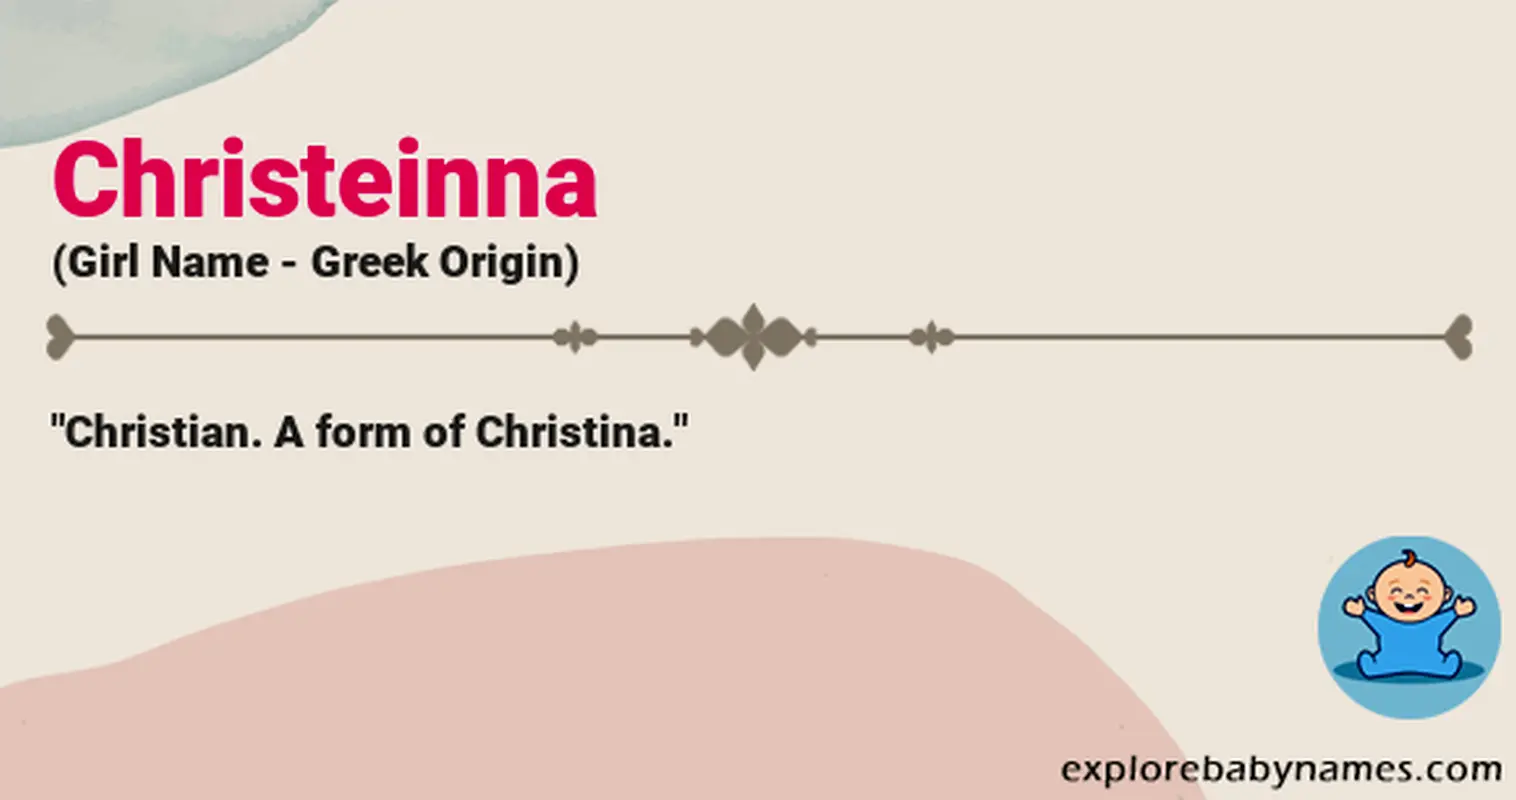 Meaning of Christeinna